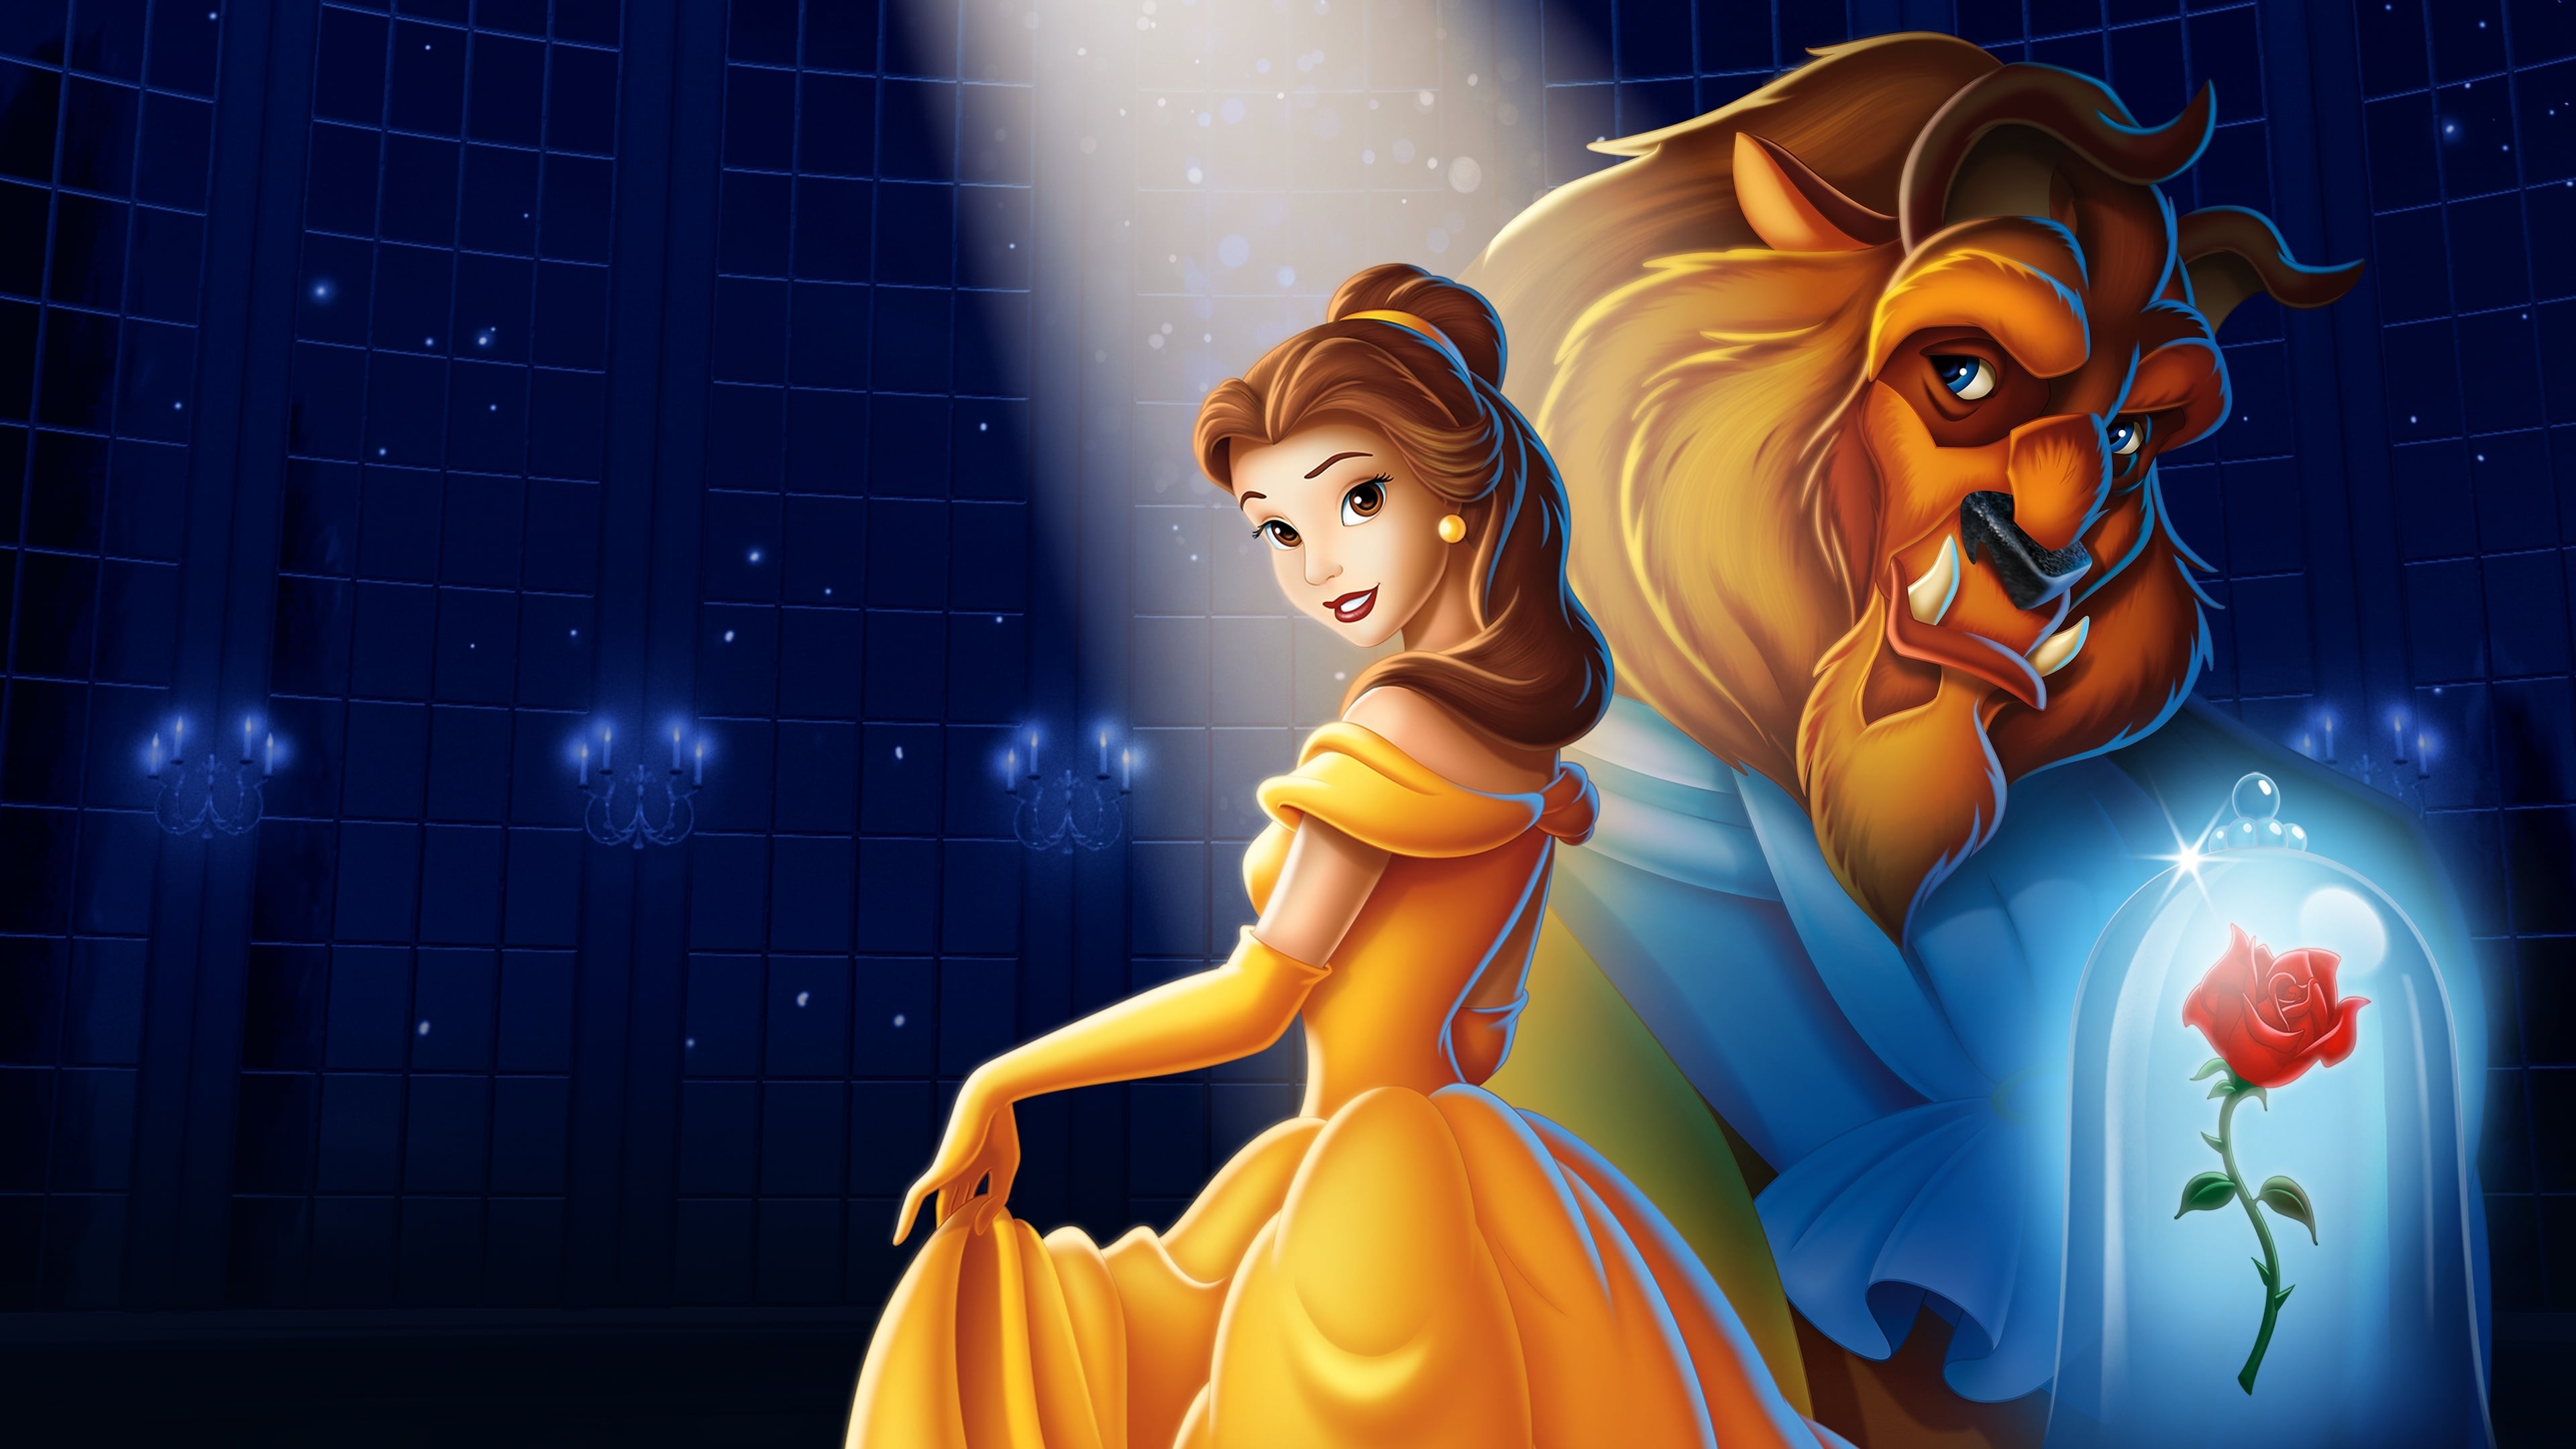 Beast Beauty And The Beast Belle Beauty And The Beast Beauty And The Beast Rose 3840x2160